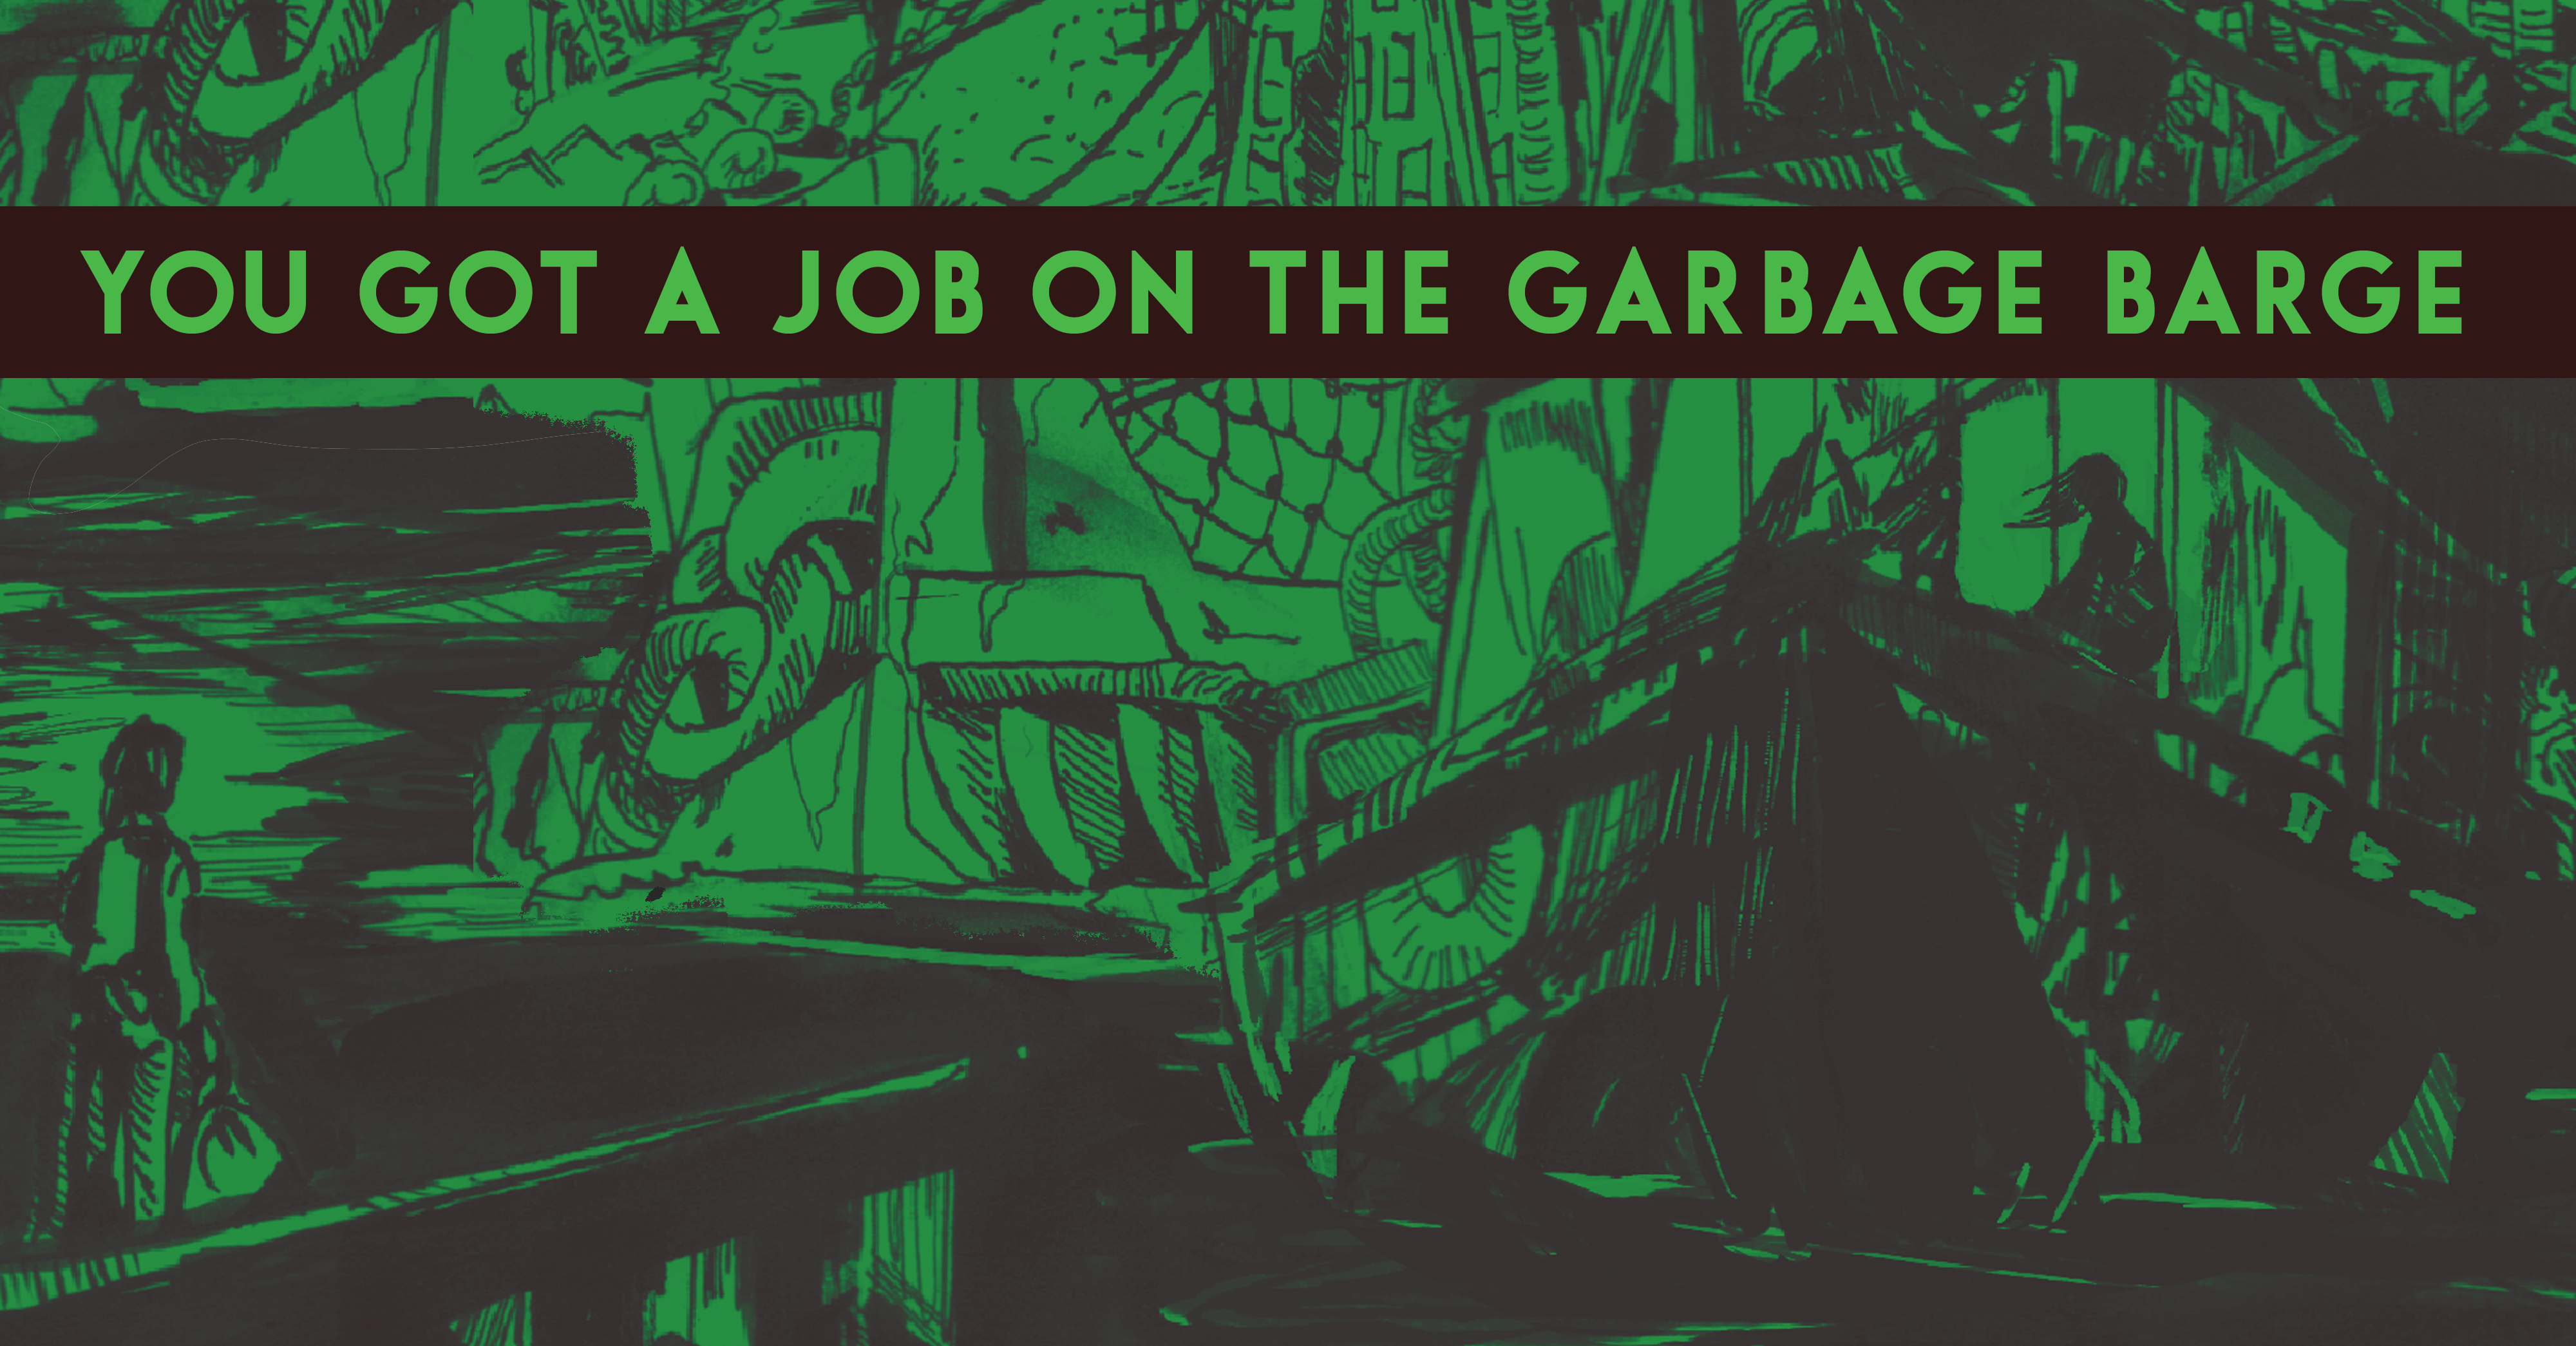 YOU GOT A JOB ON THE GARBAGE BARGE